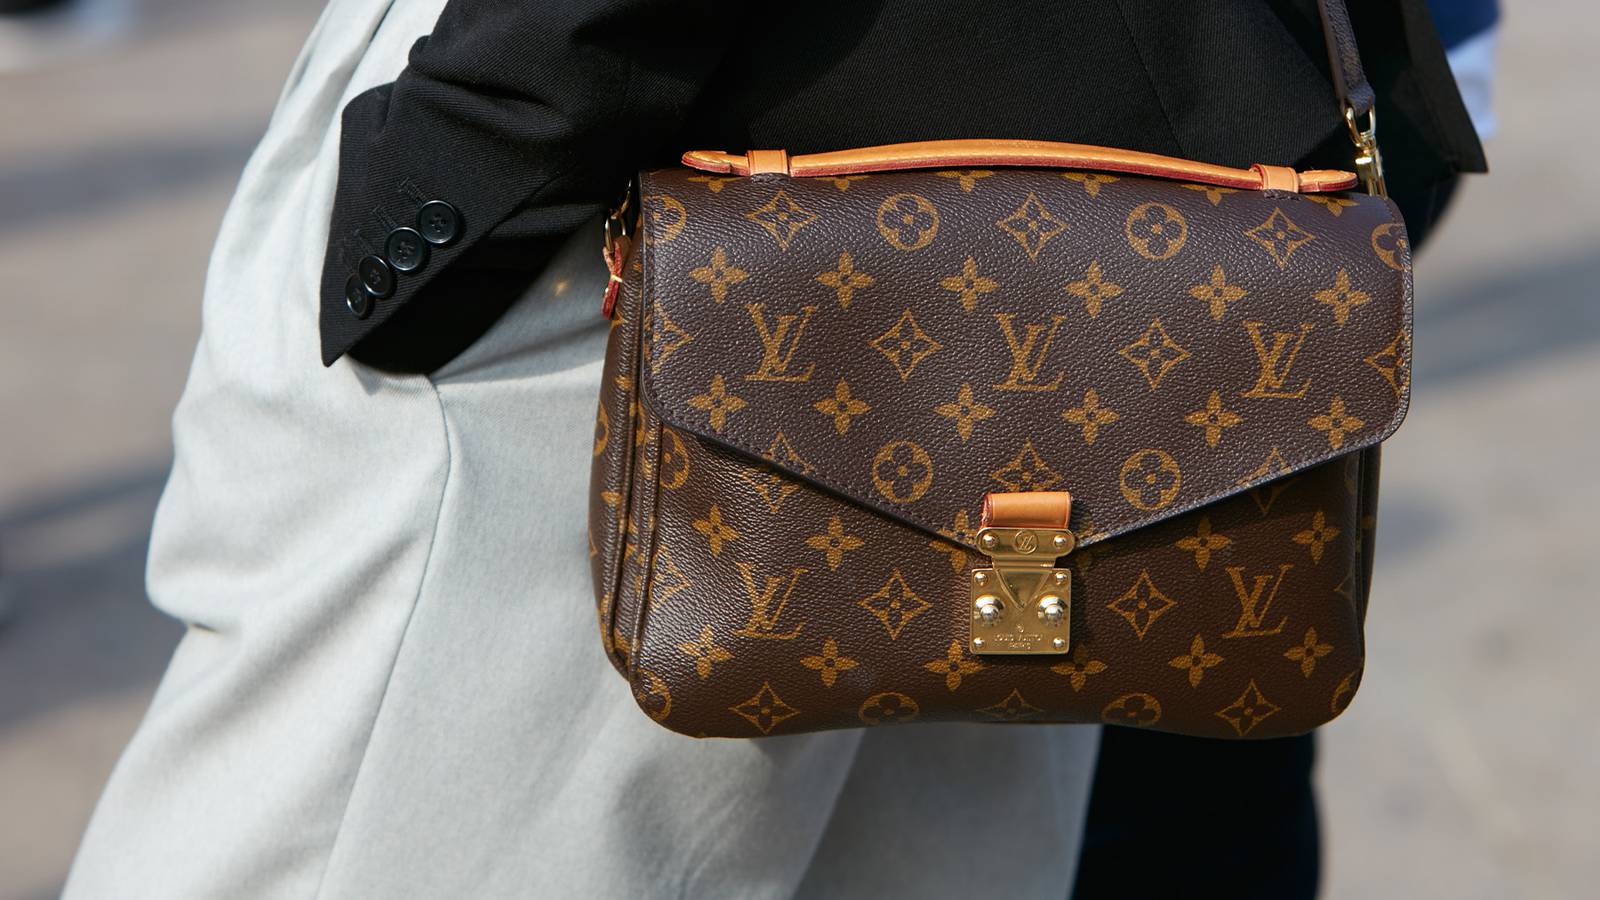 LVMH, Prada Group and Richemont Implement Blockchain Tech, & Chanel to Get  Rid of Authenticity Cards? - BagAddicts Anonymous